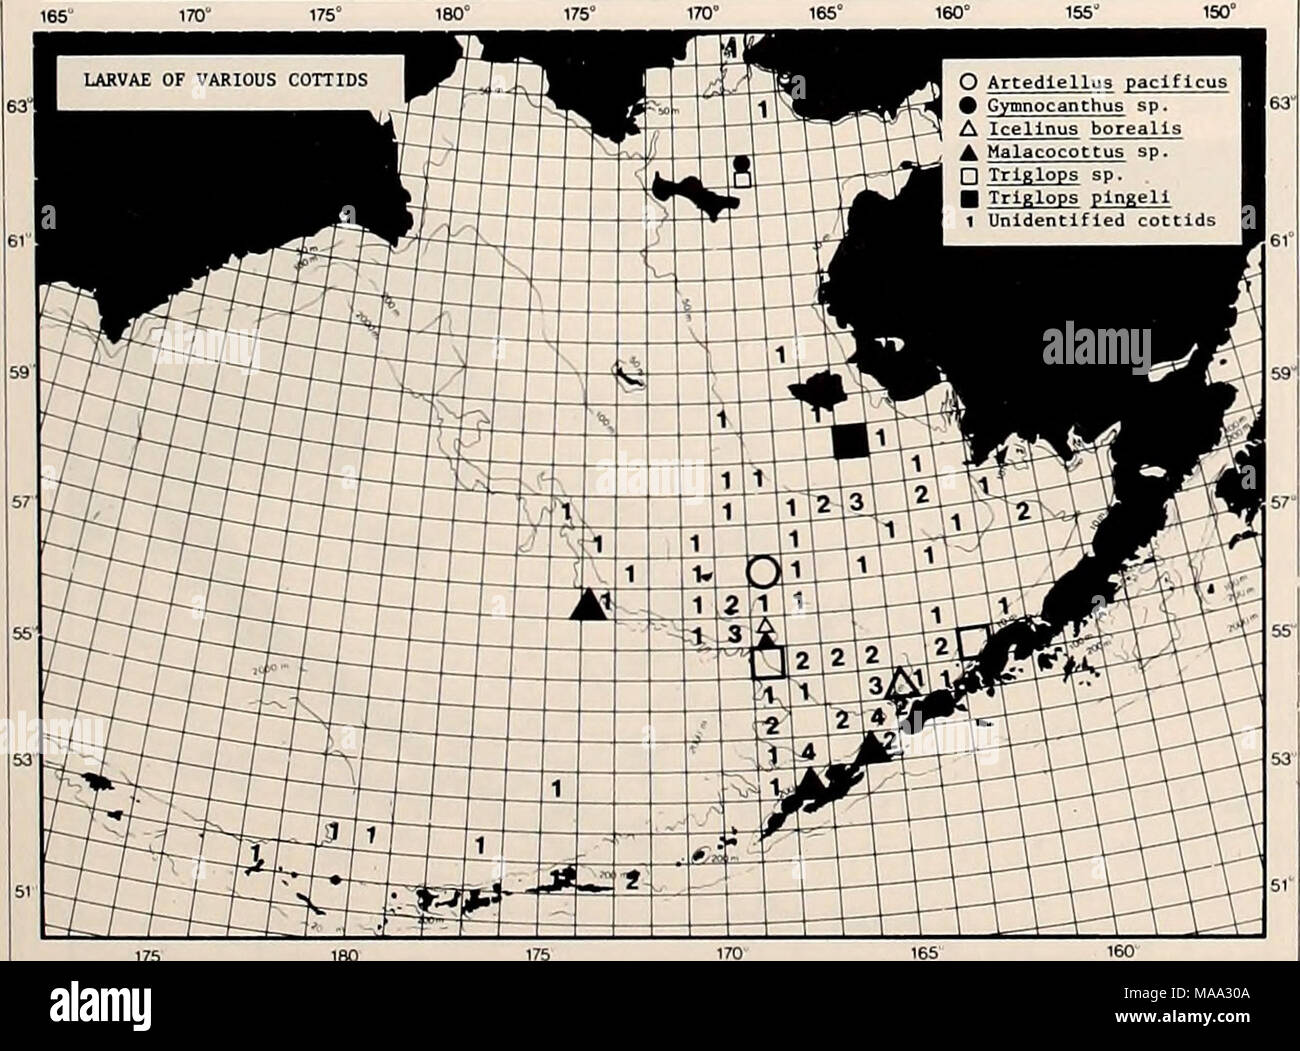 . The Eastern Bering Sea Shelf : oceanography and resources / edited by Donald W. Hood and John A. Calder . Figure 30-22. Number of stations at which larvae of various cottids have been caught. Each unnumbered symbol represents one station. 165&quot; 170&quot; 175&quot; 180&quot; ITS&quot; 17C 165Â° 160^ 155 150' ^^^^^B O ARonus acipenserinus 1 !| 1 Ijl ^^HHP â¢ Asterotheca Infraspinata â ^f^^Y^r^ A Aspidophoroides sp. â 11 -- A A. bartoni â # !Li-U4-V:2*.-?^^,â,... , 1 ^^^^^^^^^^^^^^^^f^^'^^t^J.^i-^'i &gt;; L'l^^H â¼ Odontopyxis trispinosa 1 ^^^^^^^Kl^l l&quot;&quot;T-fâT-L 1 1 k ^ fy, [^^^ Stock Photo